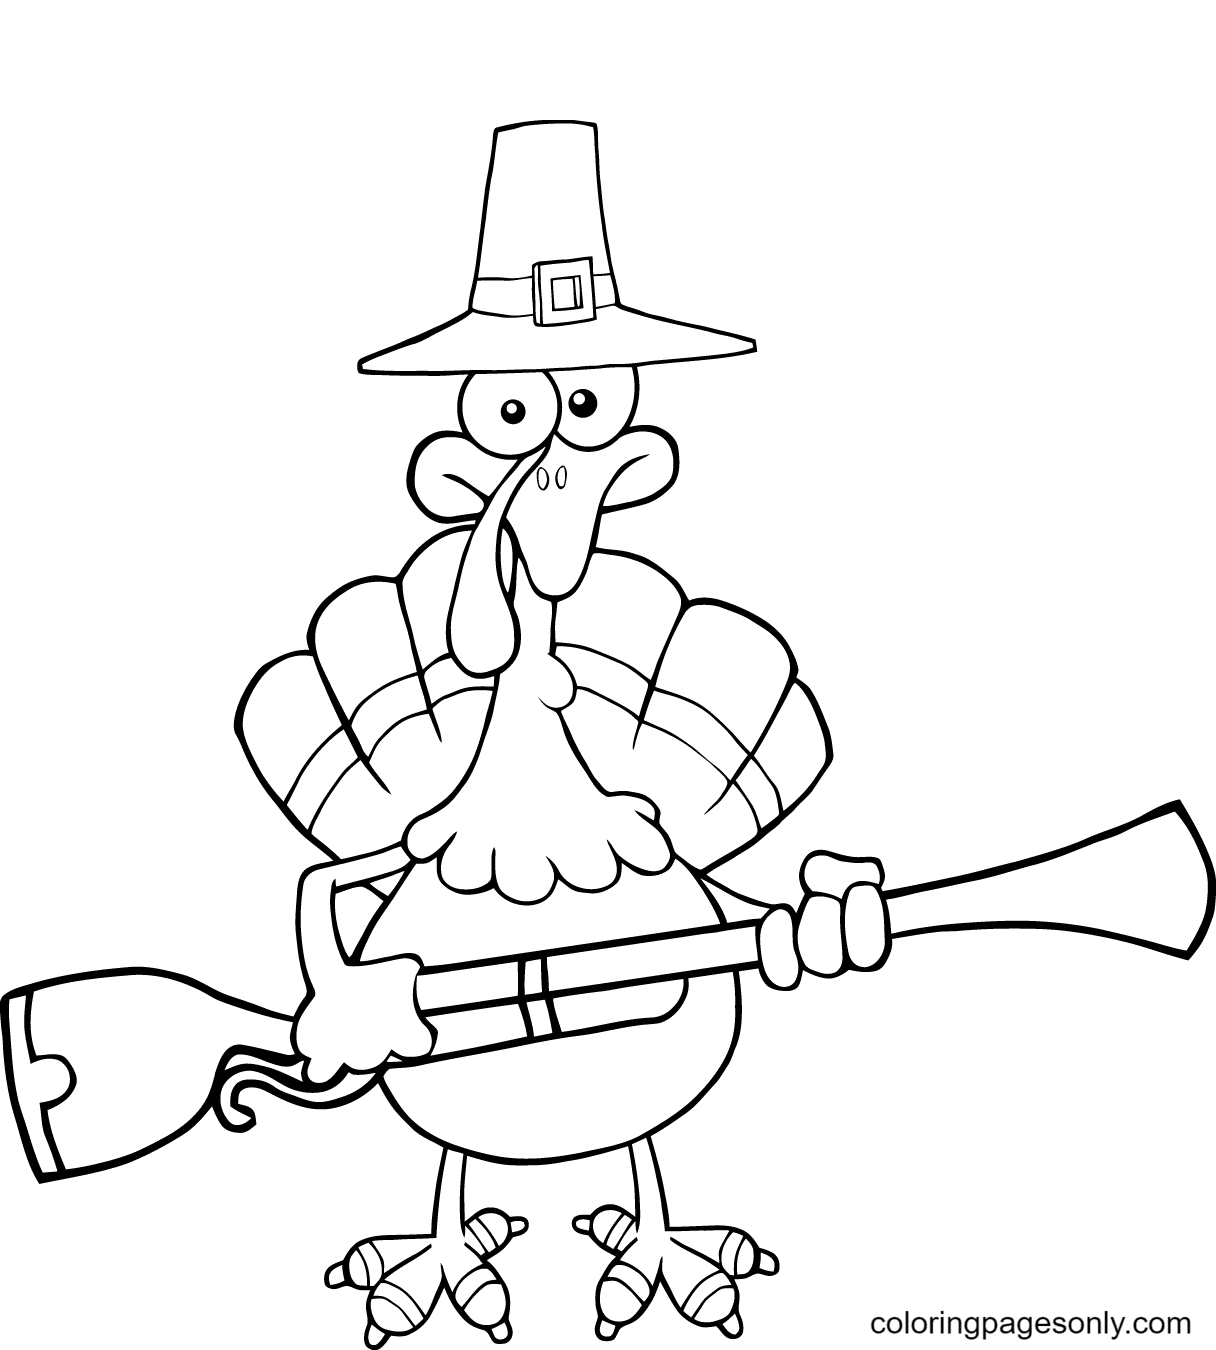 Turkey with a Musket from Turkey